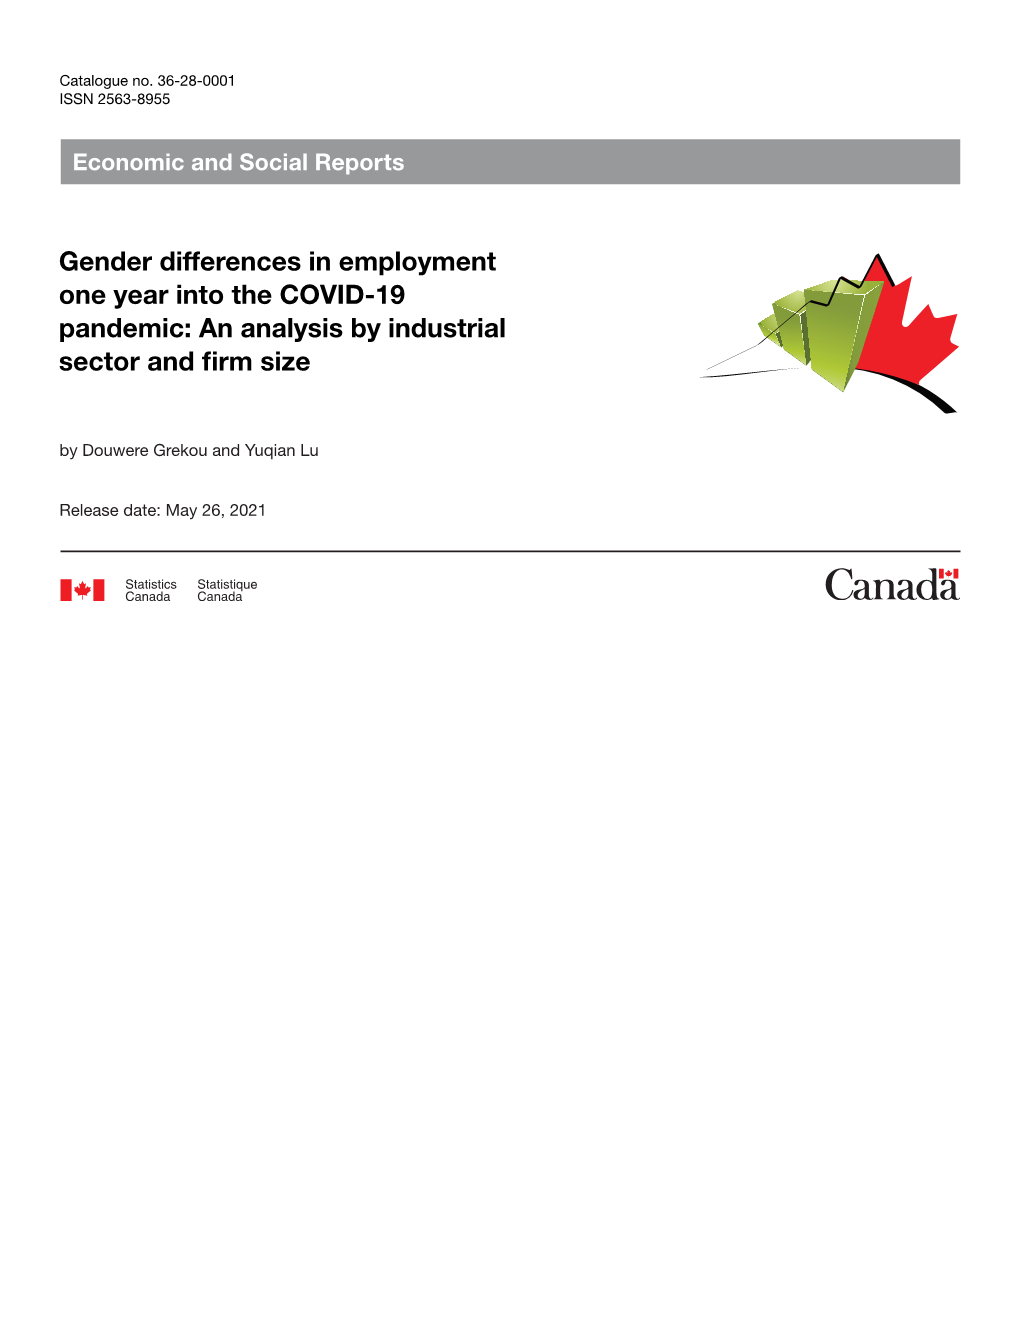 Gender Differences in Employment One Year Into the COVID-19 Pandemic: an Analysis by Industrial Sector and Firm Size